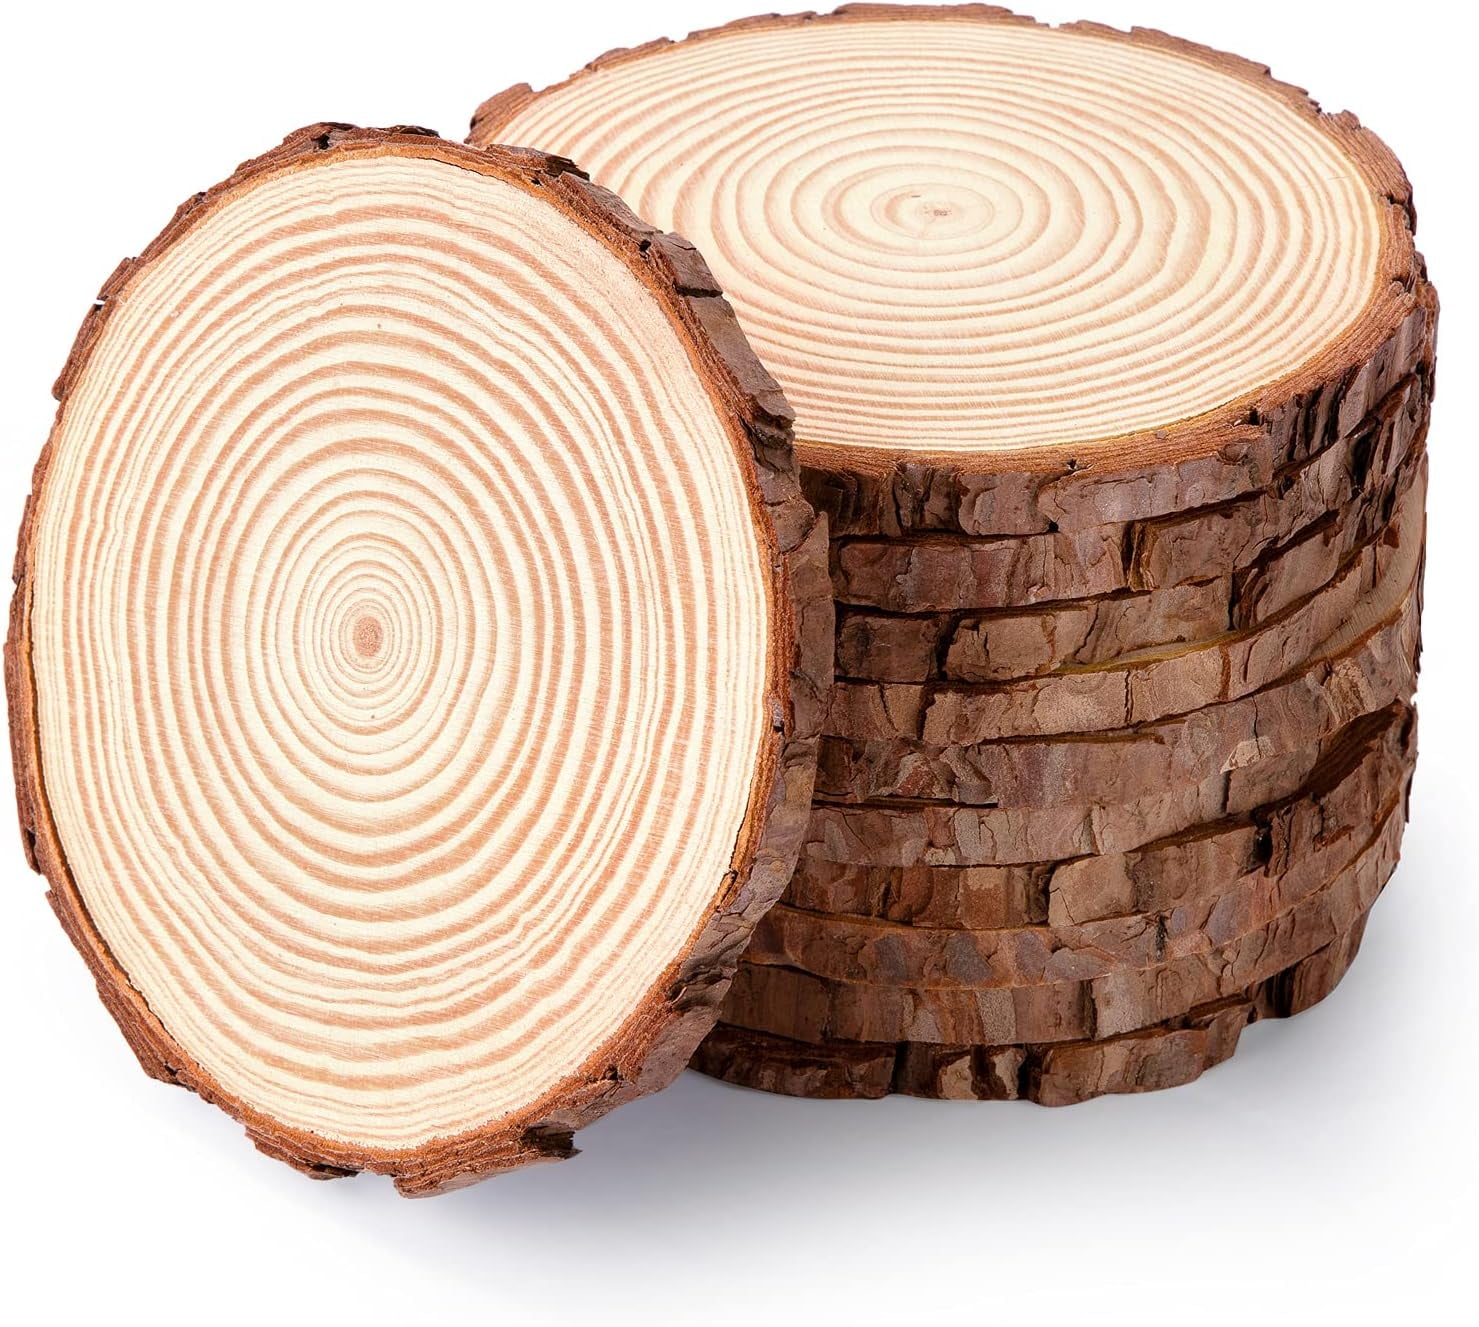  Set of 10 Wood Slices for centerpieces! Wood Slice  centerpieces, Wood Rounds, Tree Slices (10 inch)